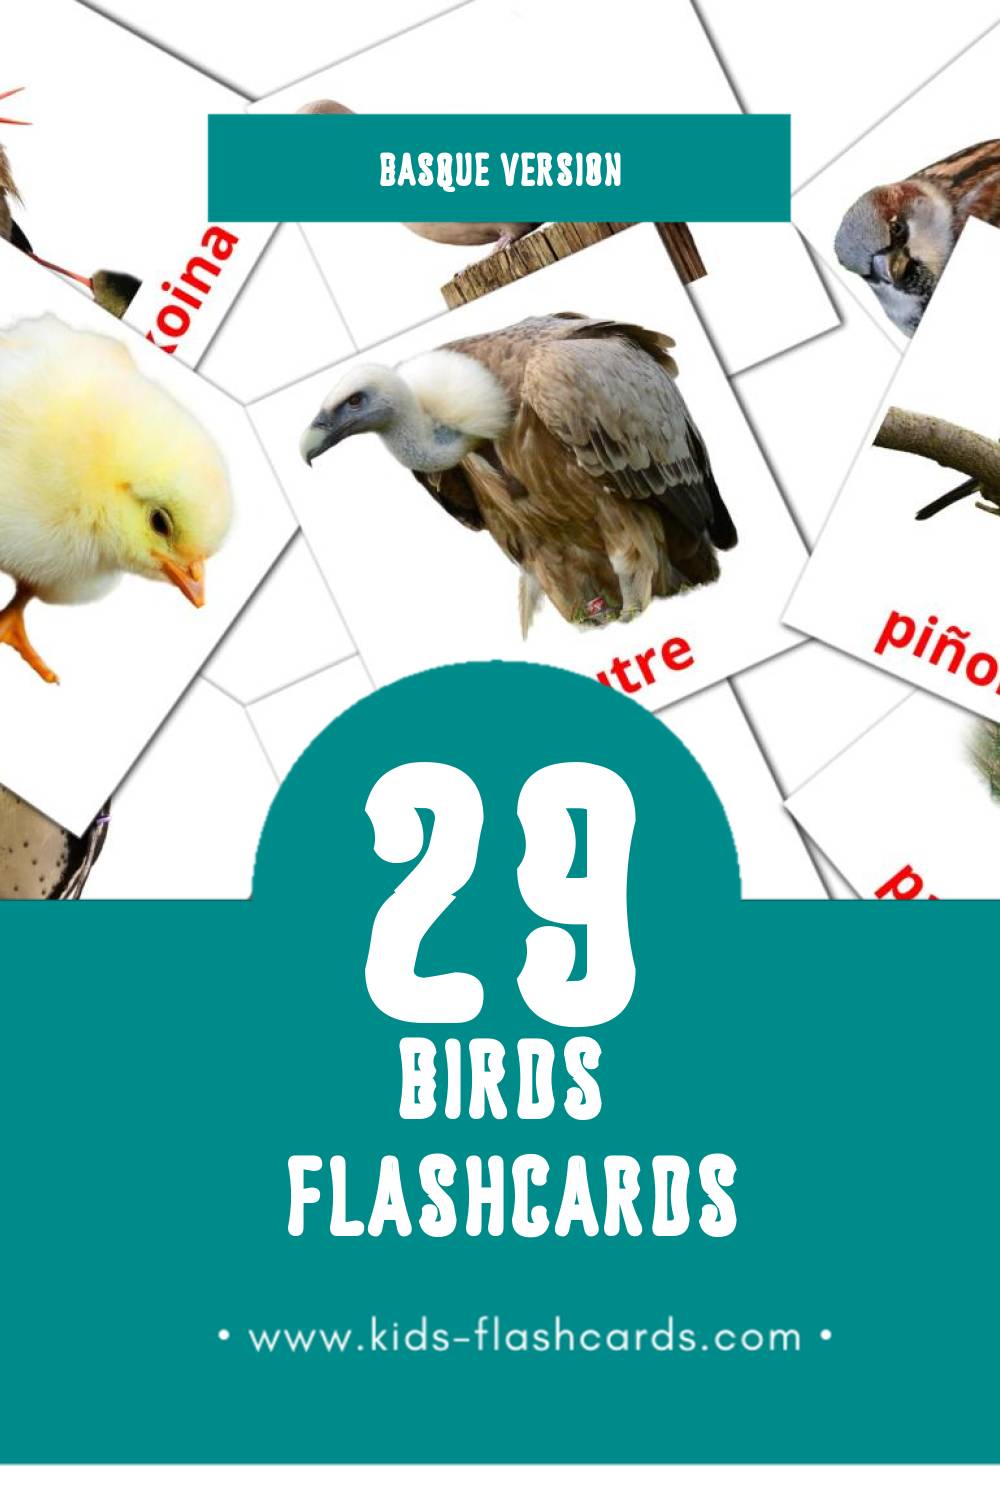 Visual Hegaztiak Flashcards for Toddlers (18 cards in Basque)